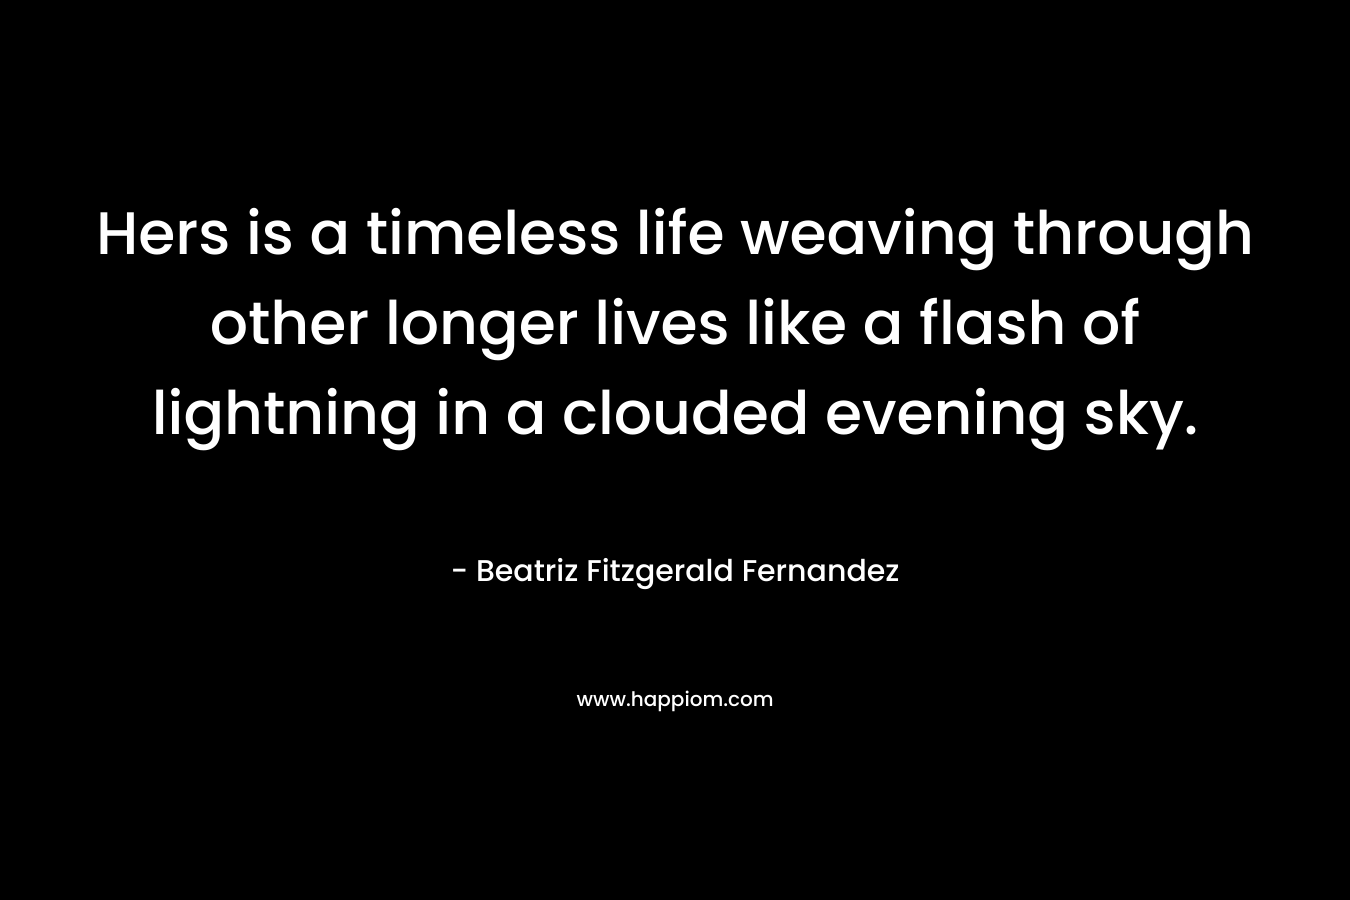 Hers is a timeless life weaving through other longer lives like a flash of lightning in a clouded evening sky. – Beatriz Fitzgerald Fernandez